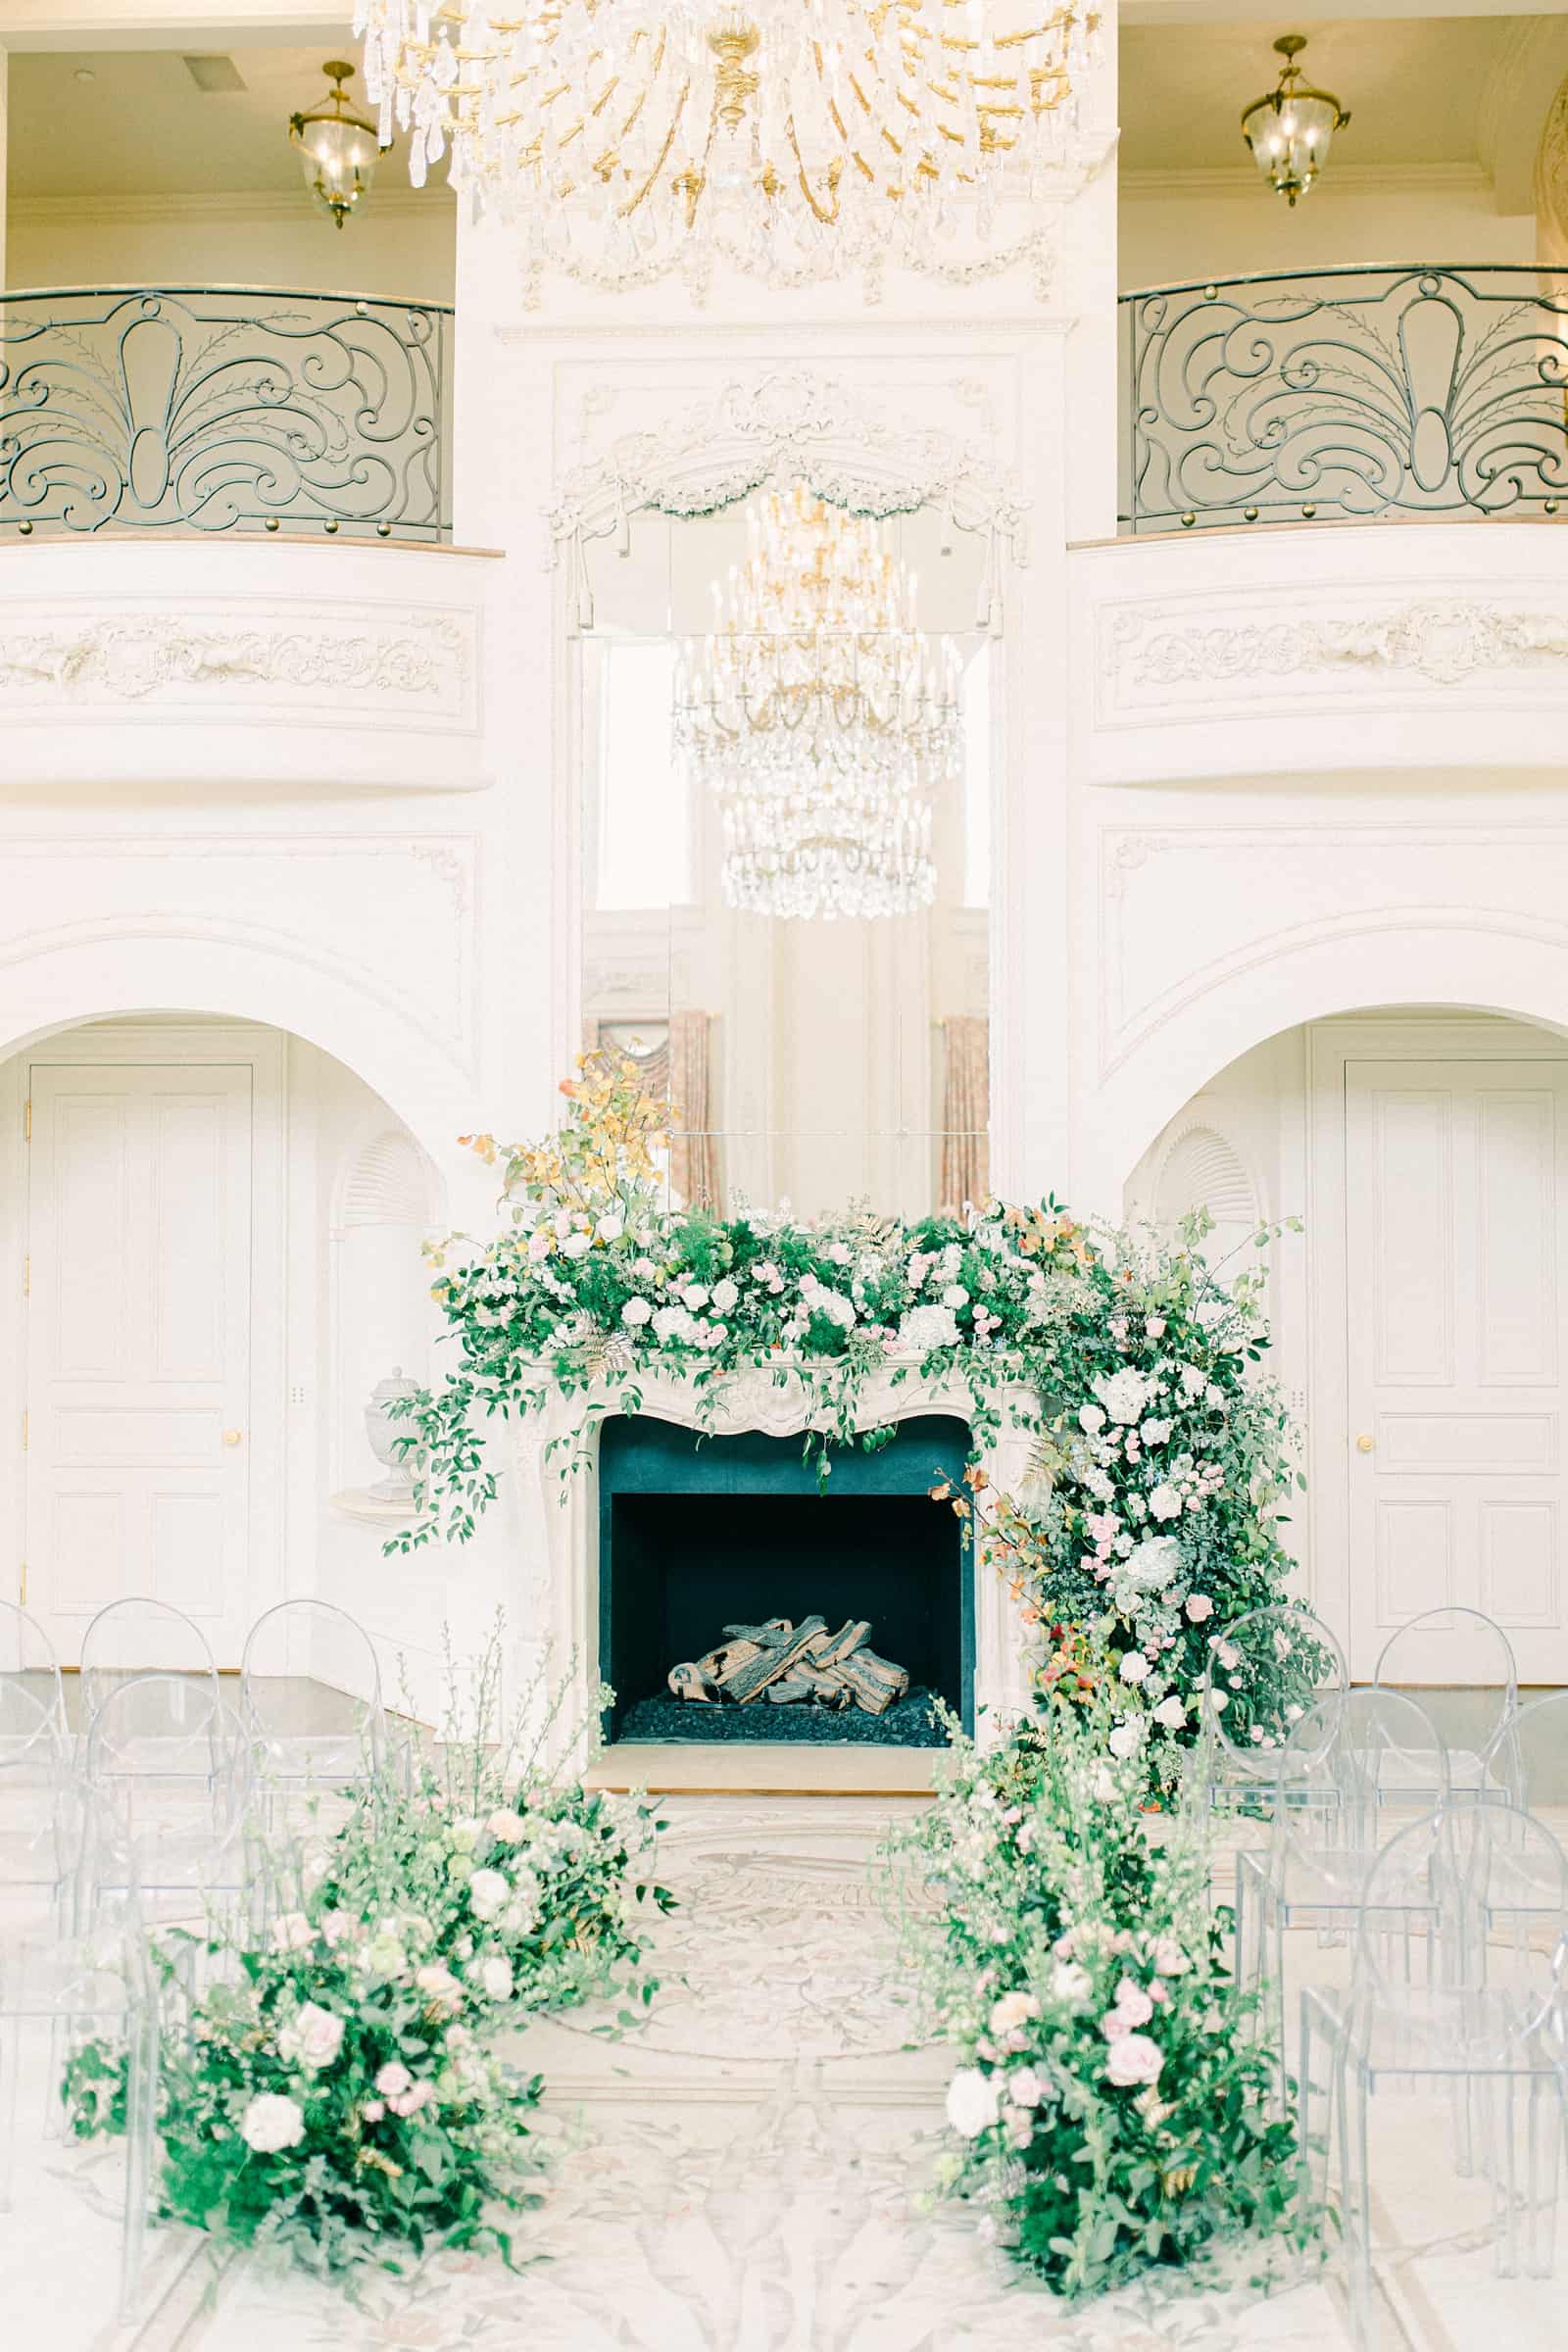 Ceremony backdrop garland with greenery and flowers in front of fireplace